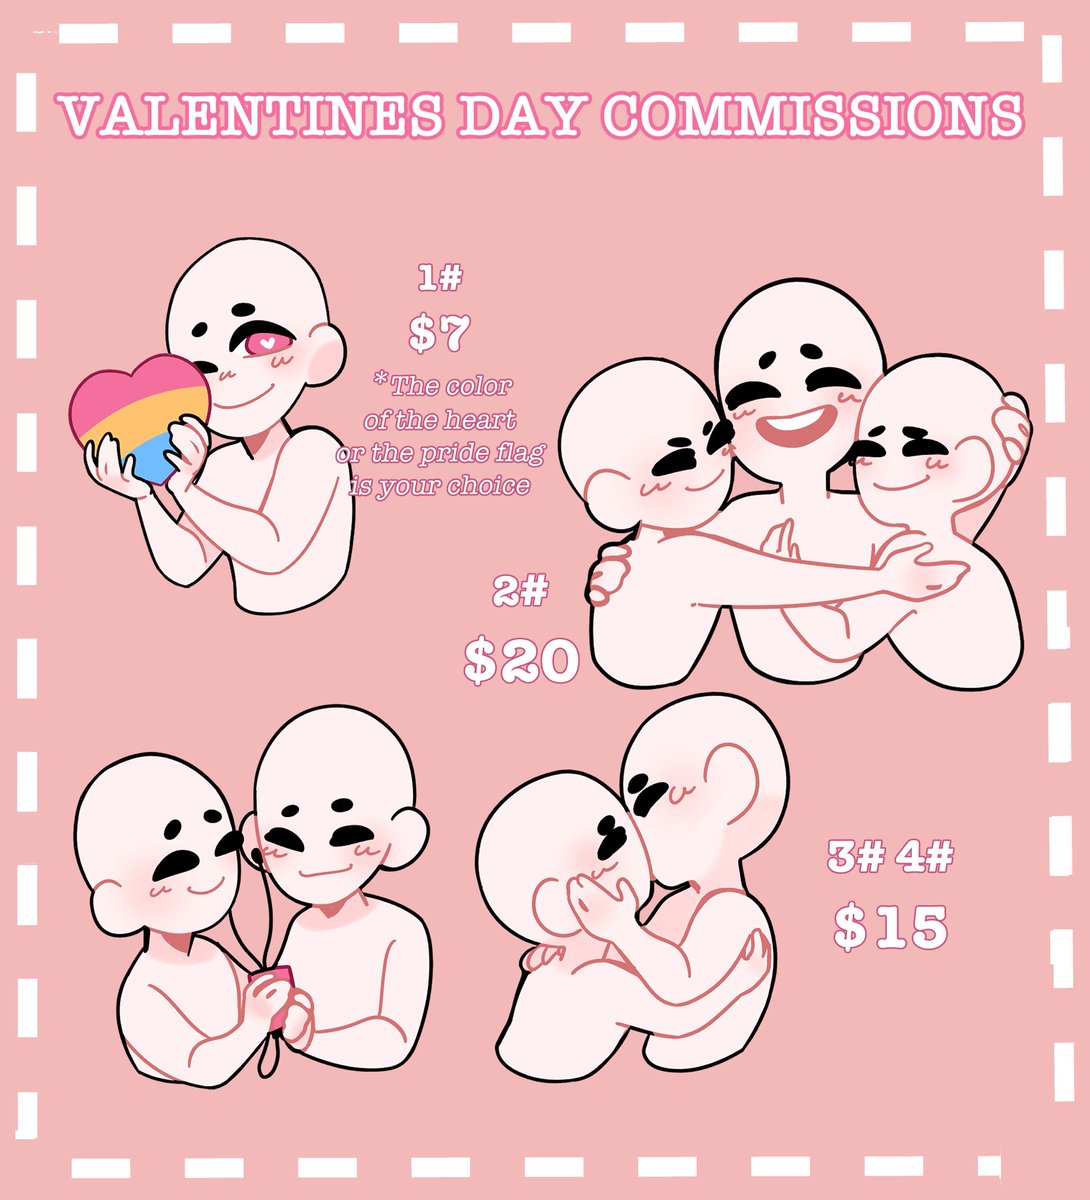 Valentines Base Commissions!!!All info in the images!!! 